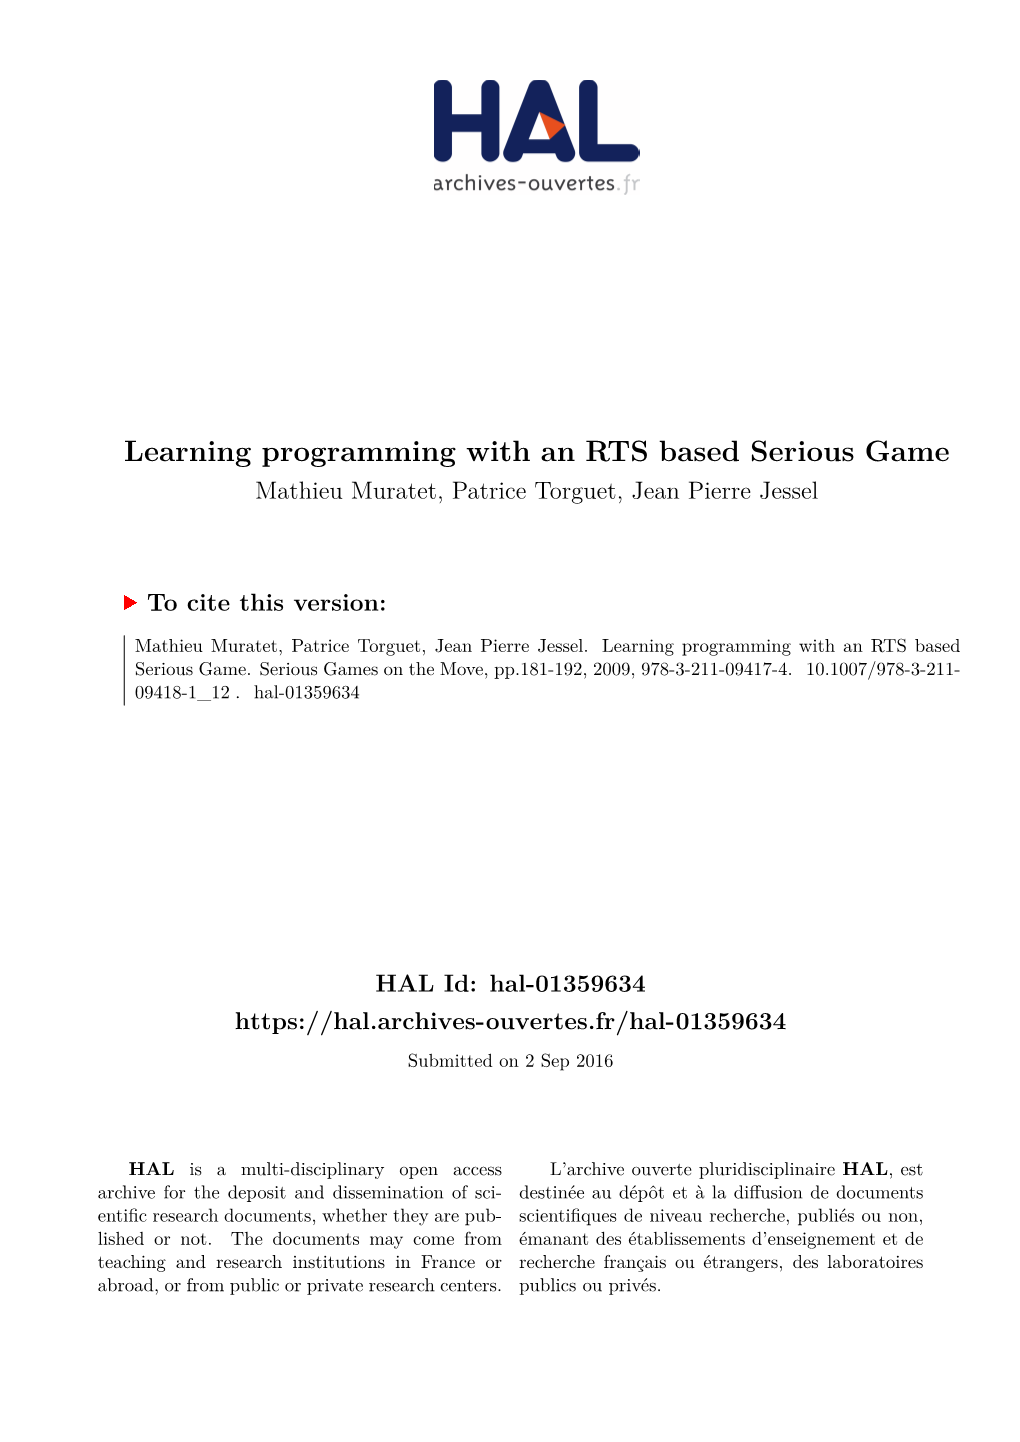 Learning Programming with an RTS Based Serious Game Mathieu Muratet, Patrice Torguet, Jean Pierre Jessel